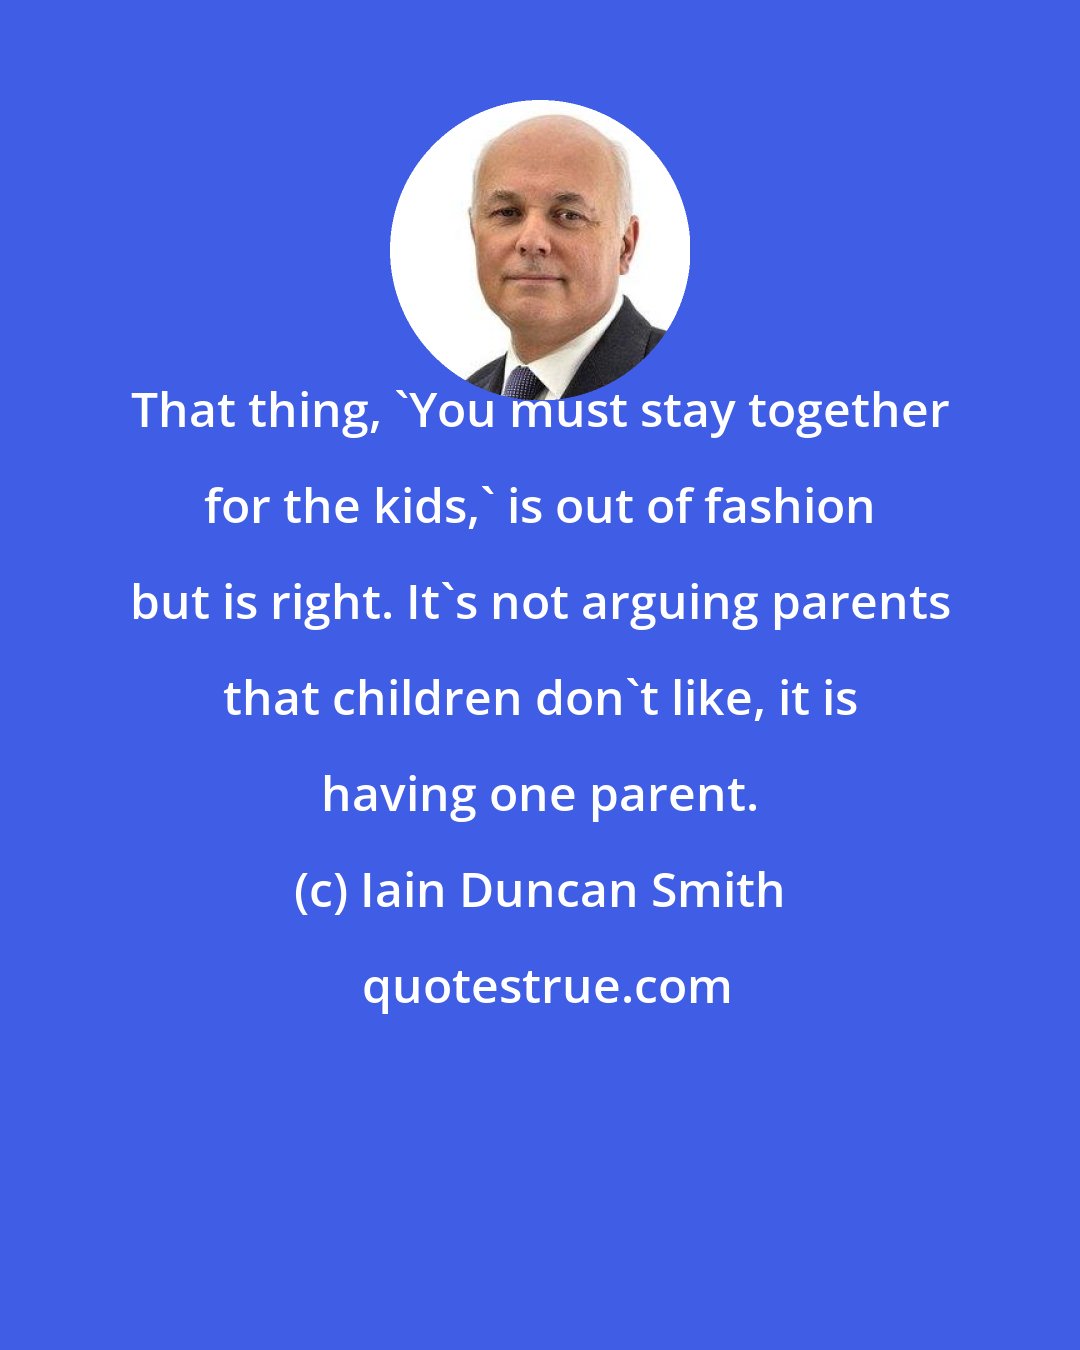 Iain Duncan Smith: That thing, 'You must stay together for the kids,' is out of fashion but is right. It's not arguing parents that children don't like, it is having one parent.